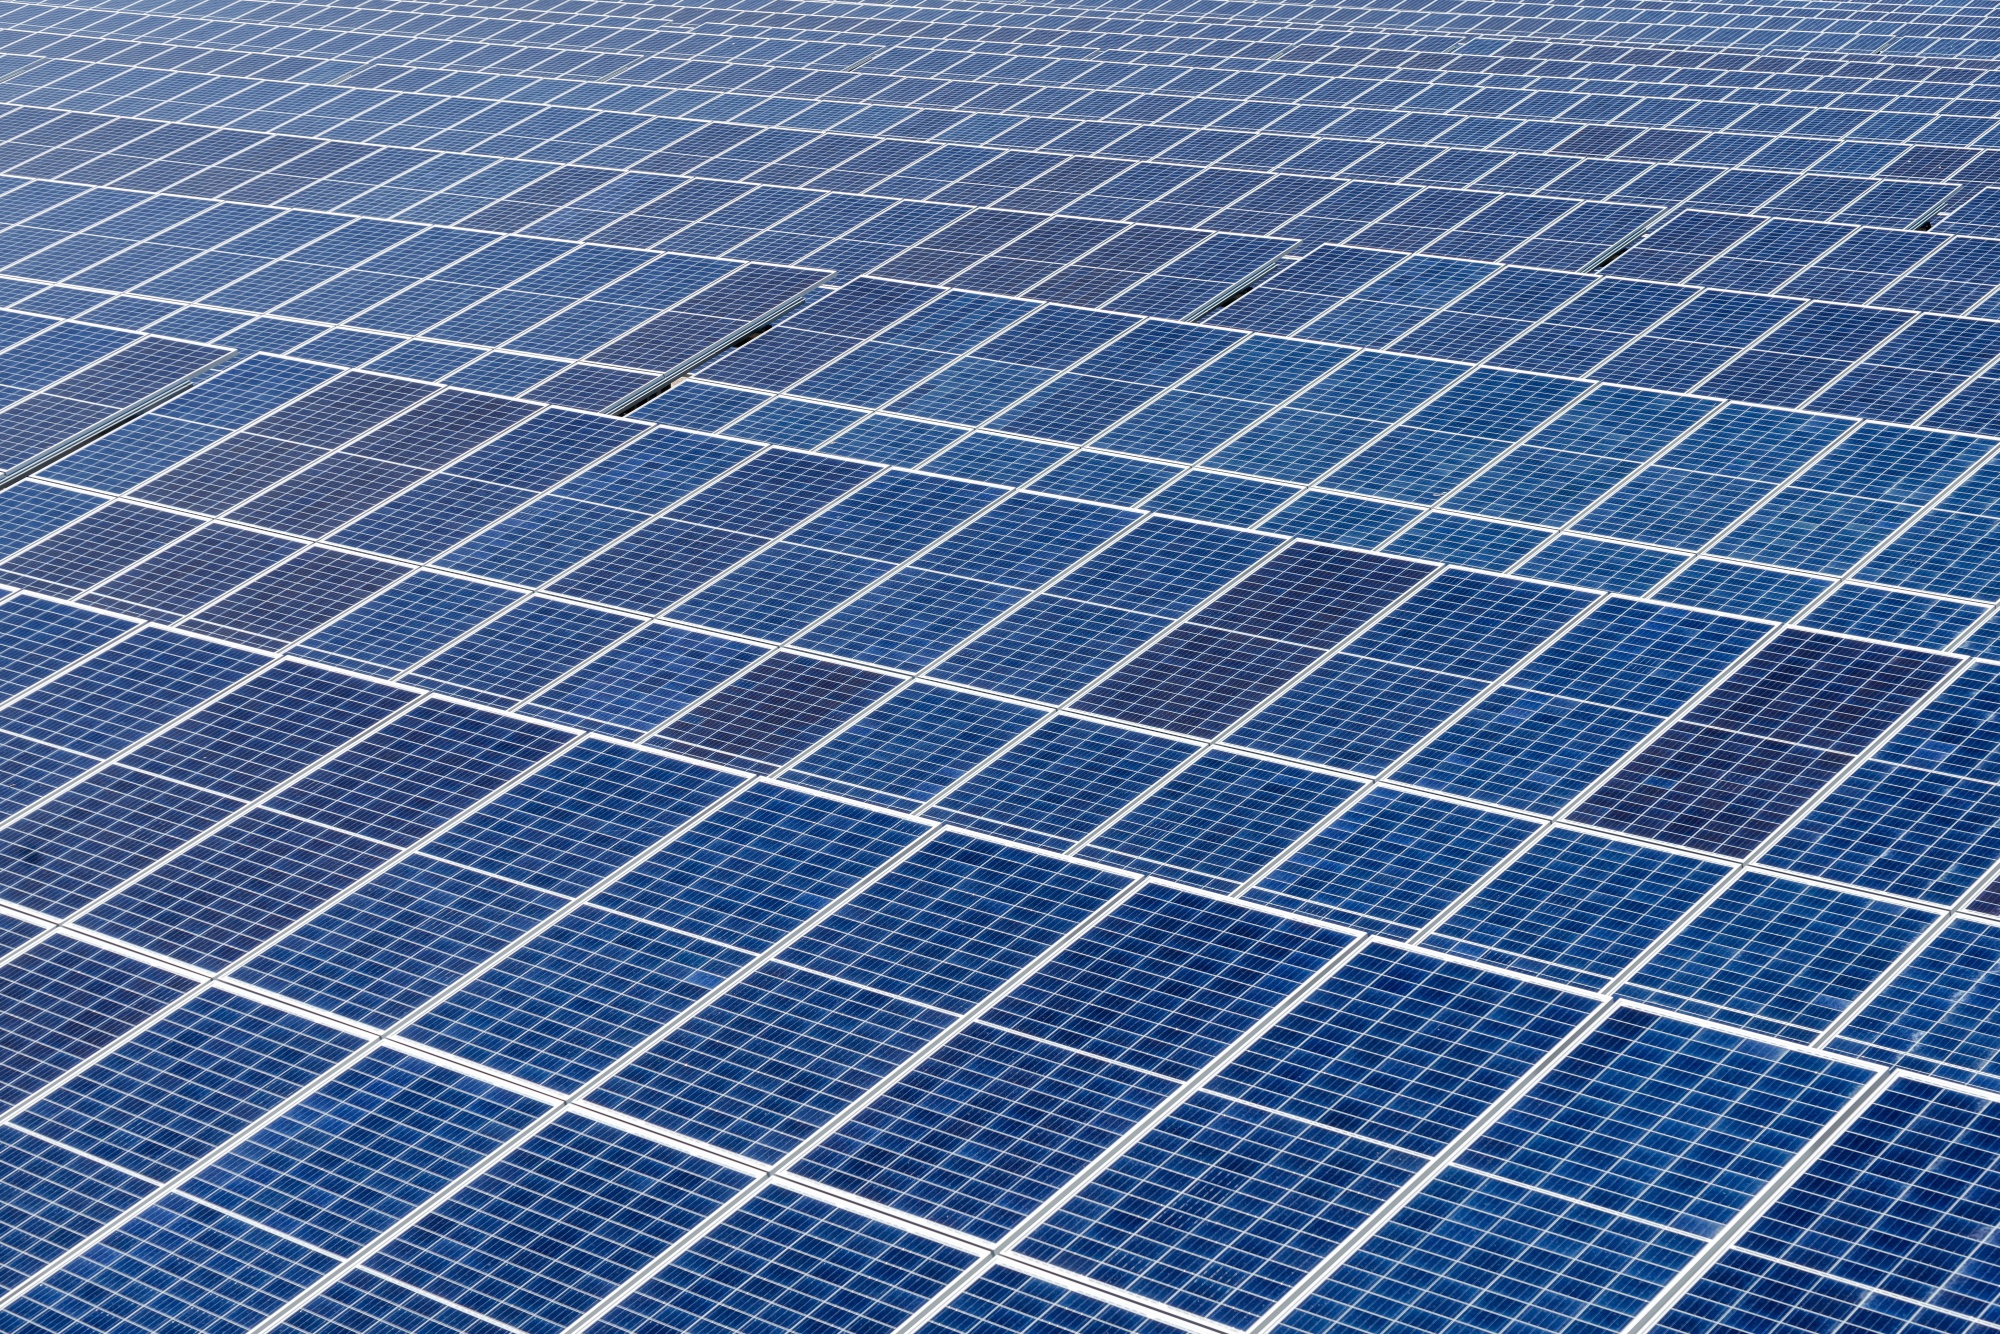 Private equity investors are pouring capital into fast-growing sectors such as solar energy.&nbsp;